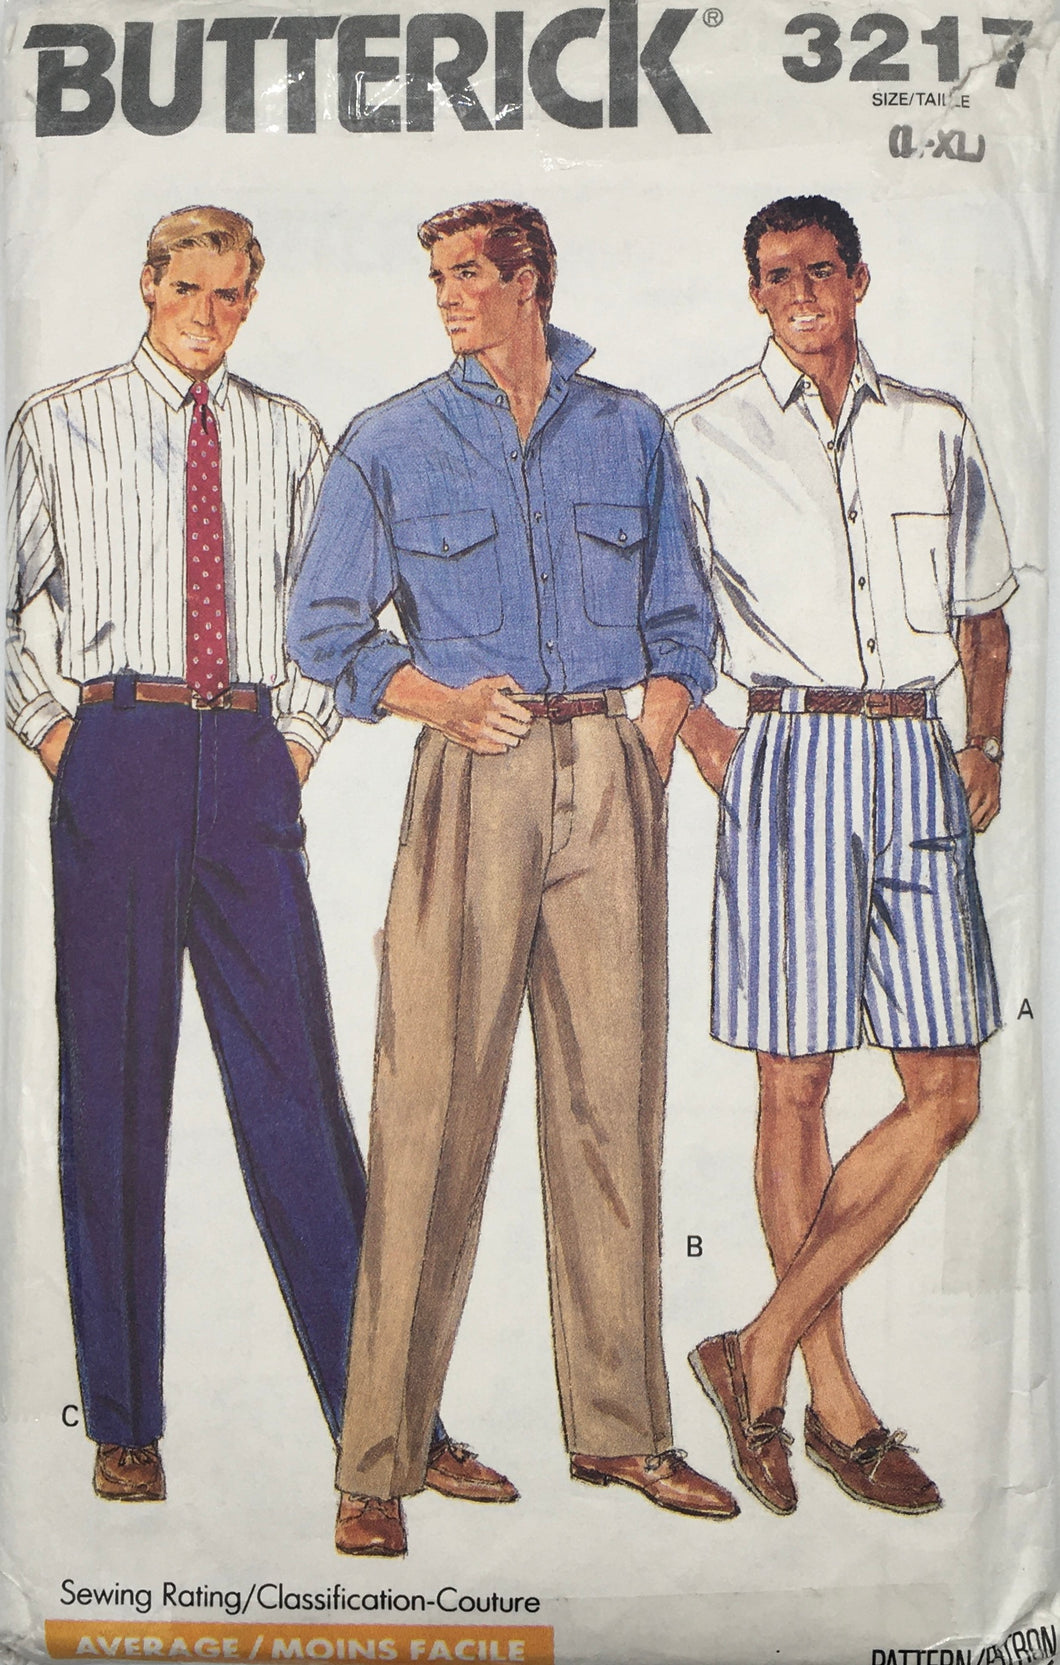 Vintage Sewing Pattern: Butterick 3217